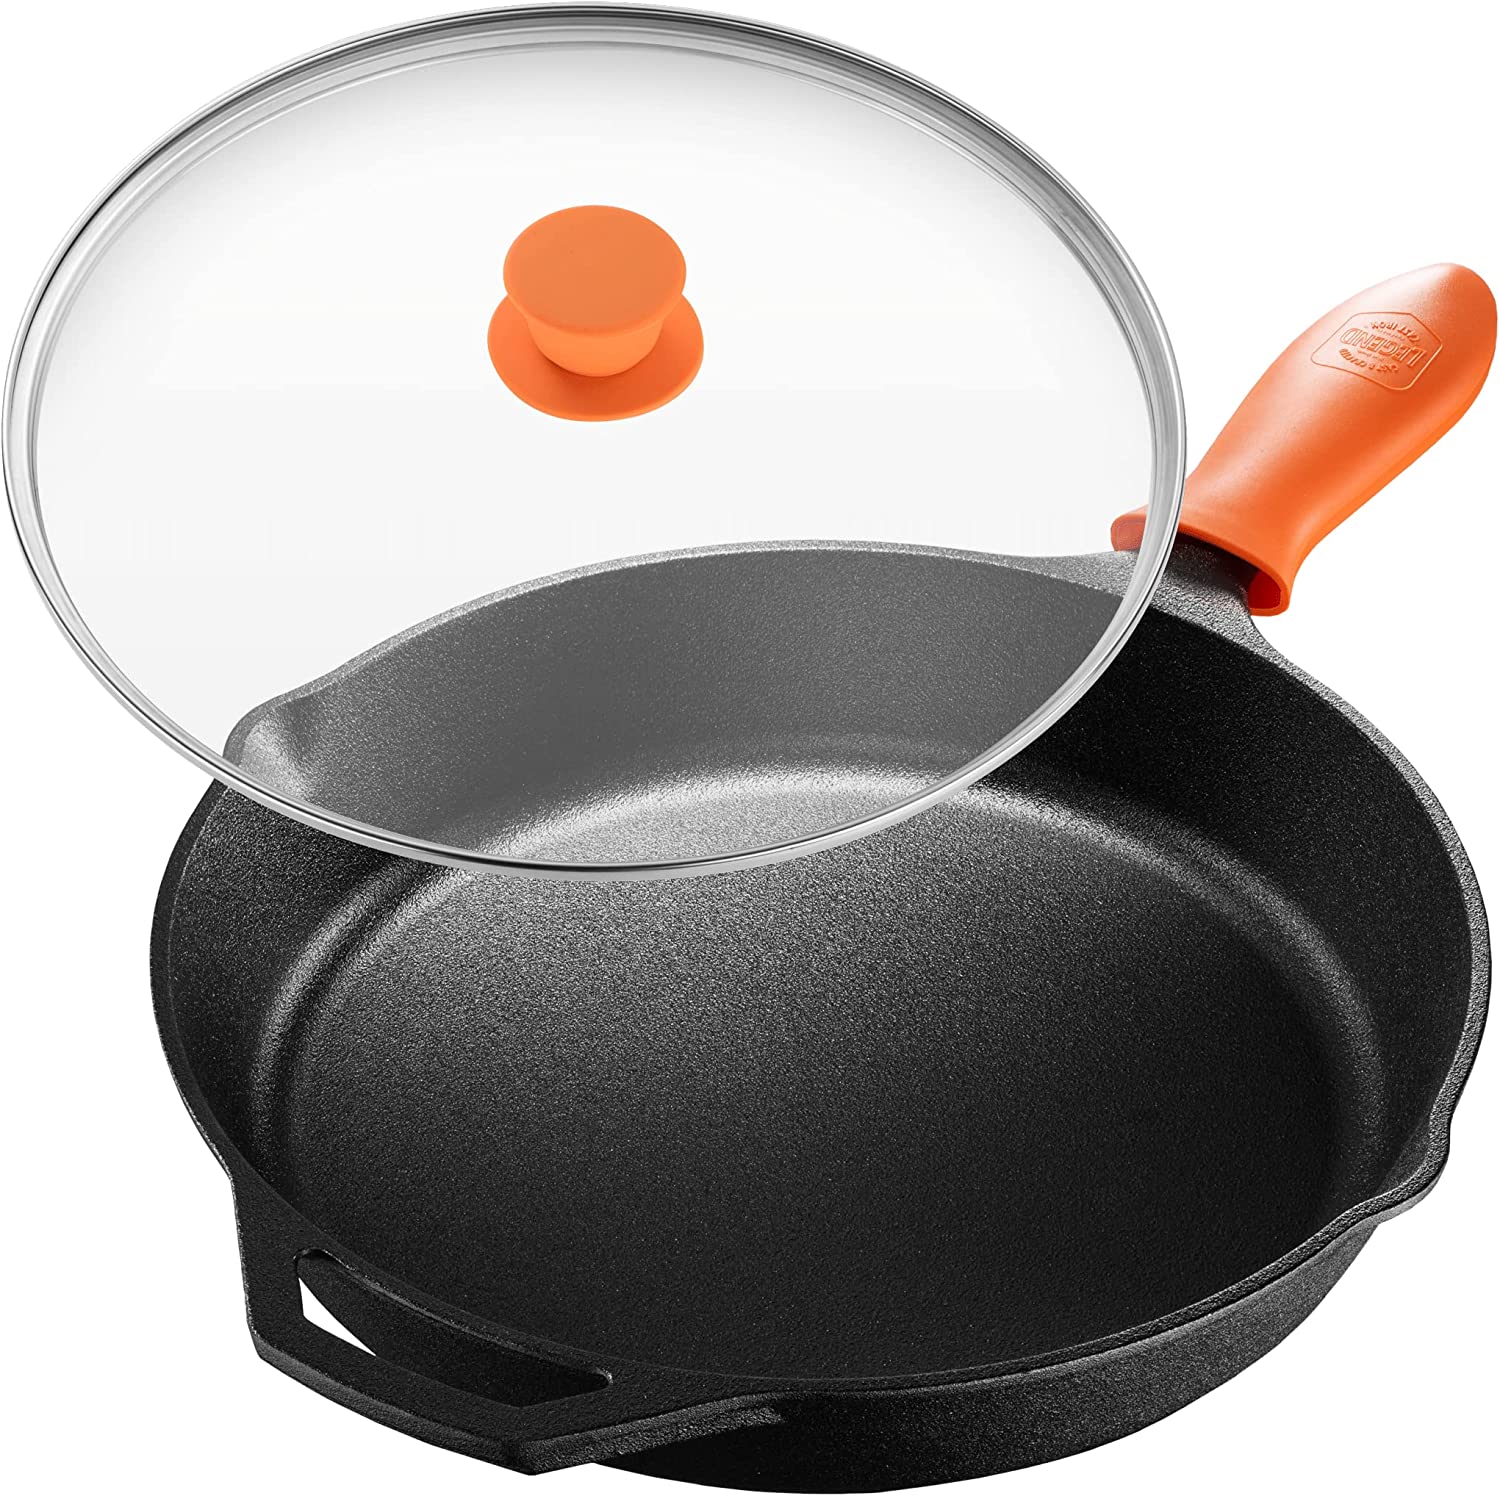 Legend Pre-Seasoned Cast Iron Skillet With Lid, 12-Inch